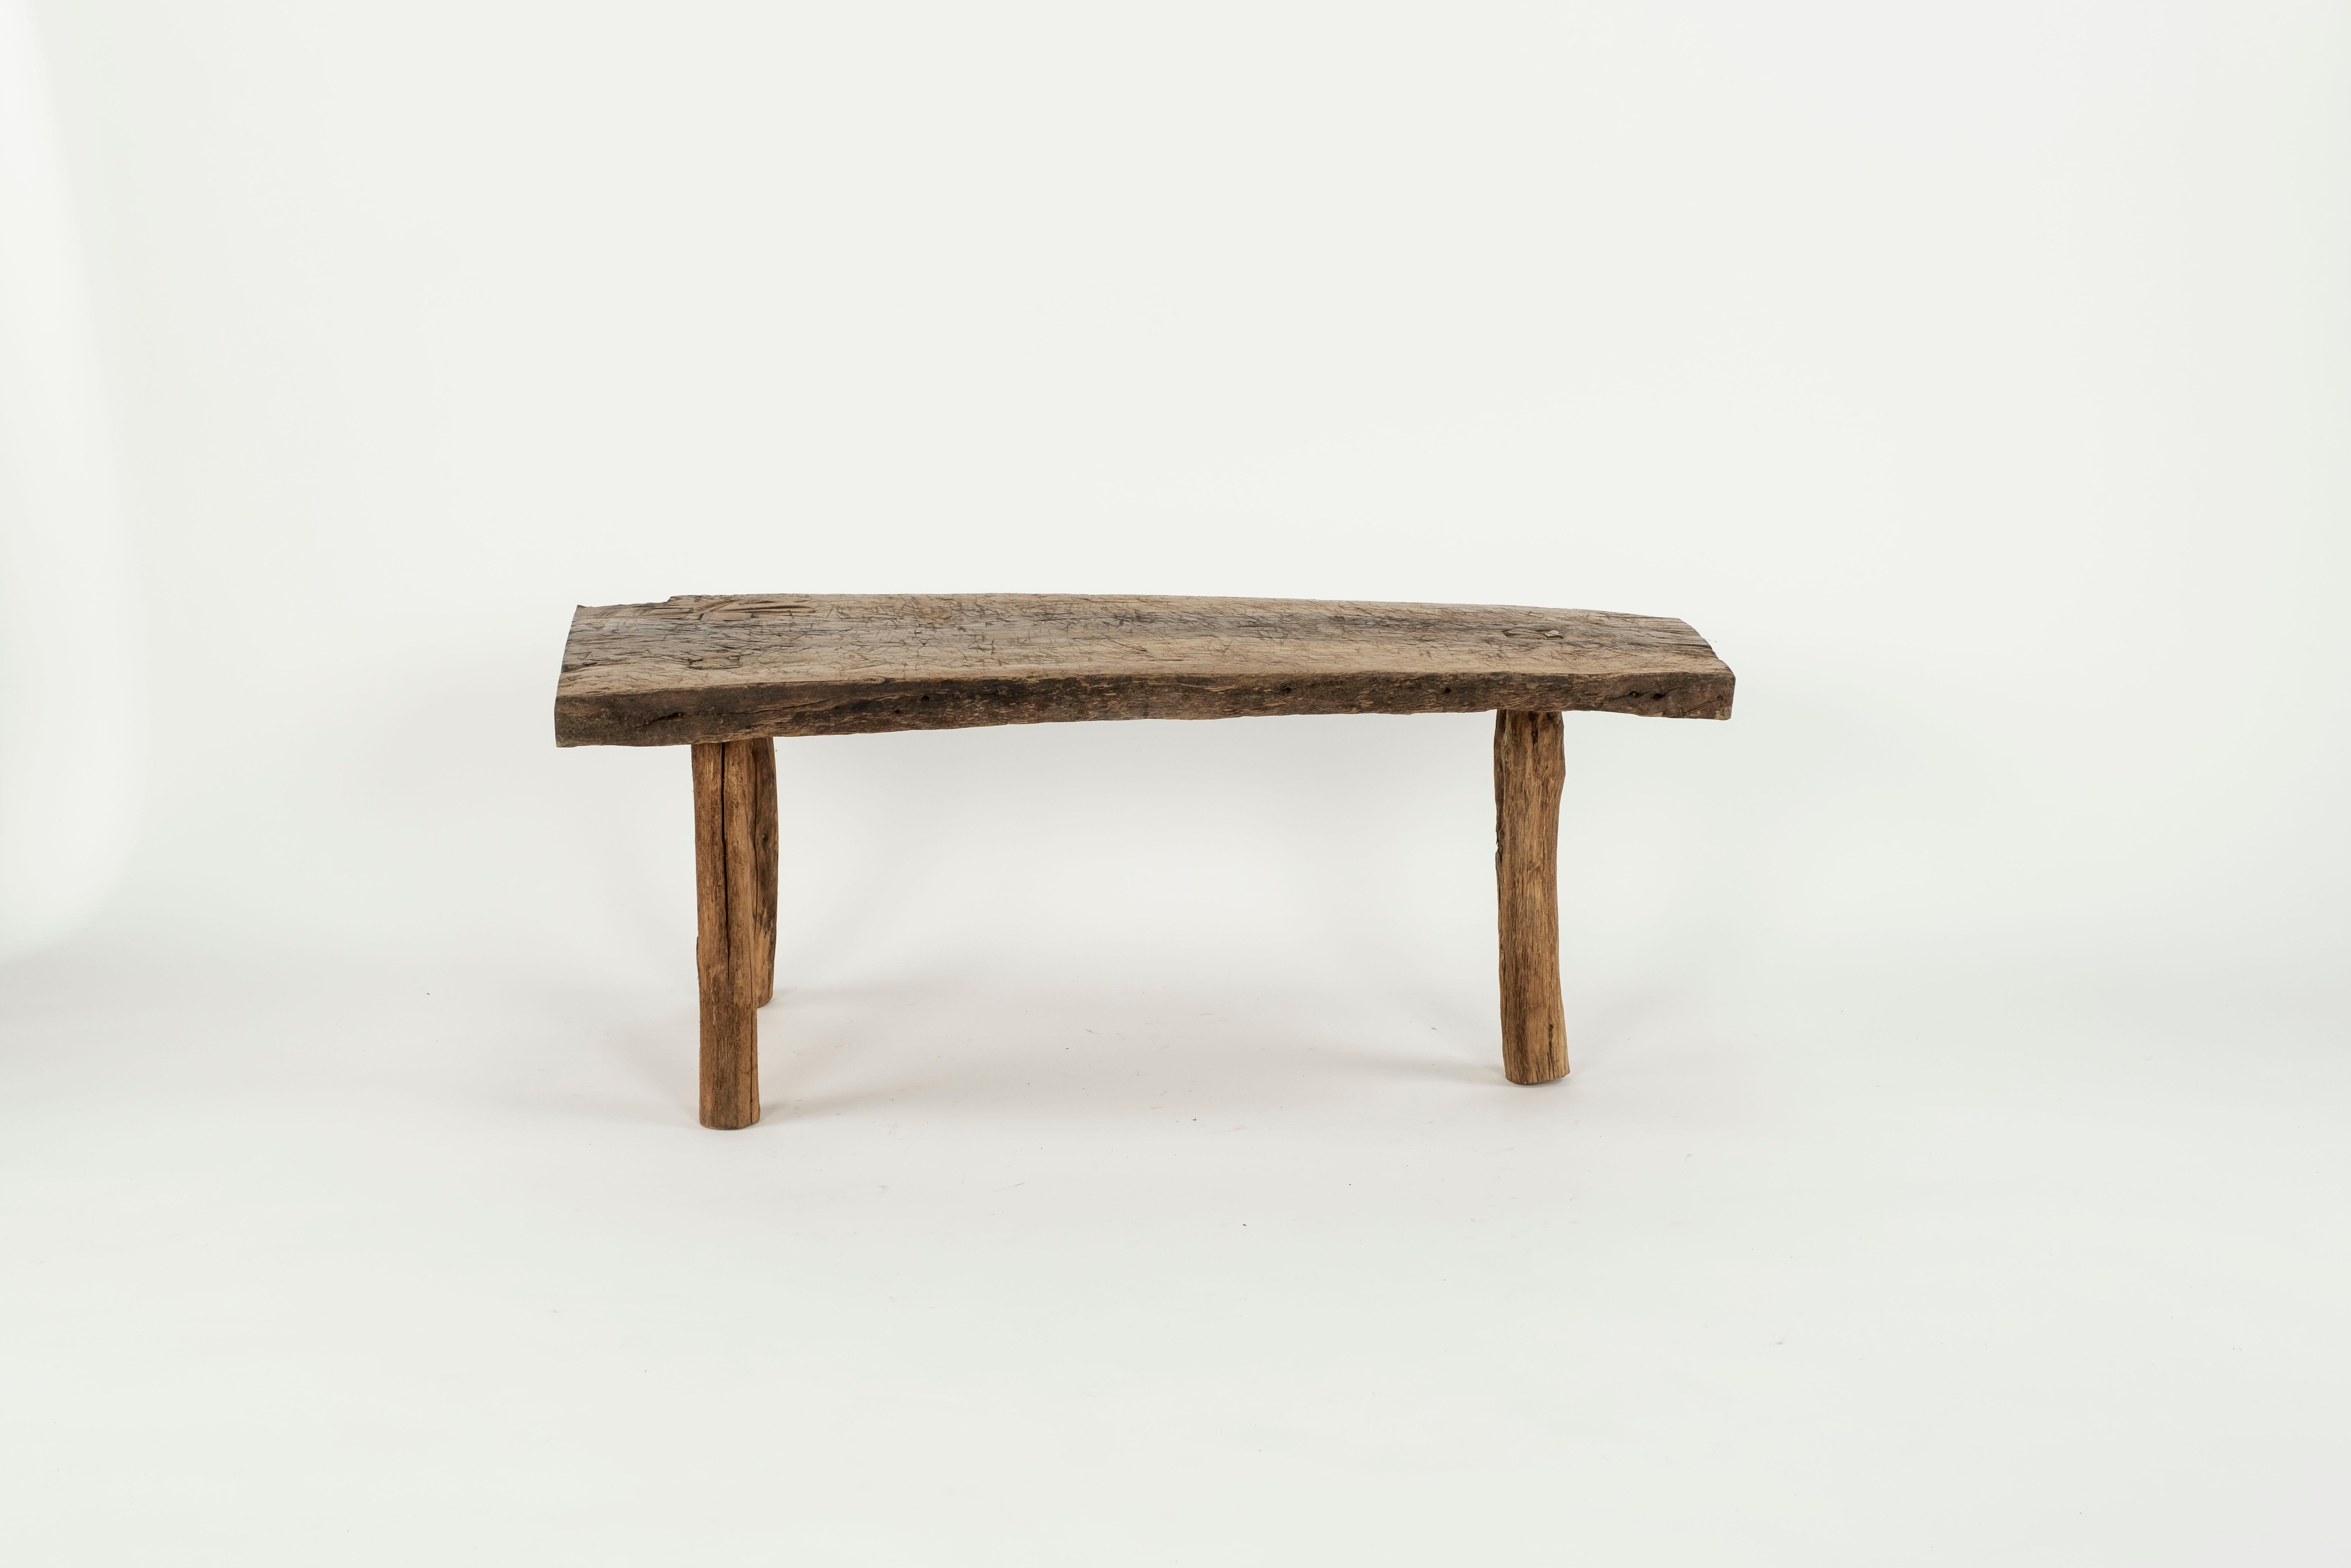 Oak Rustic Bench or Table For Sale